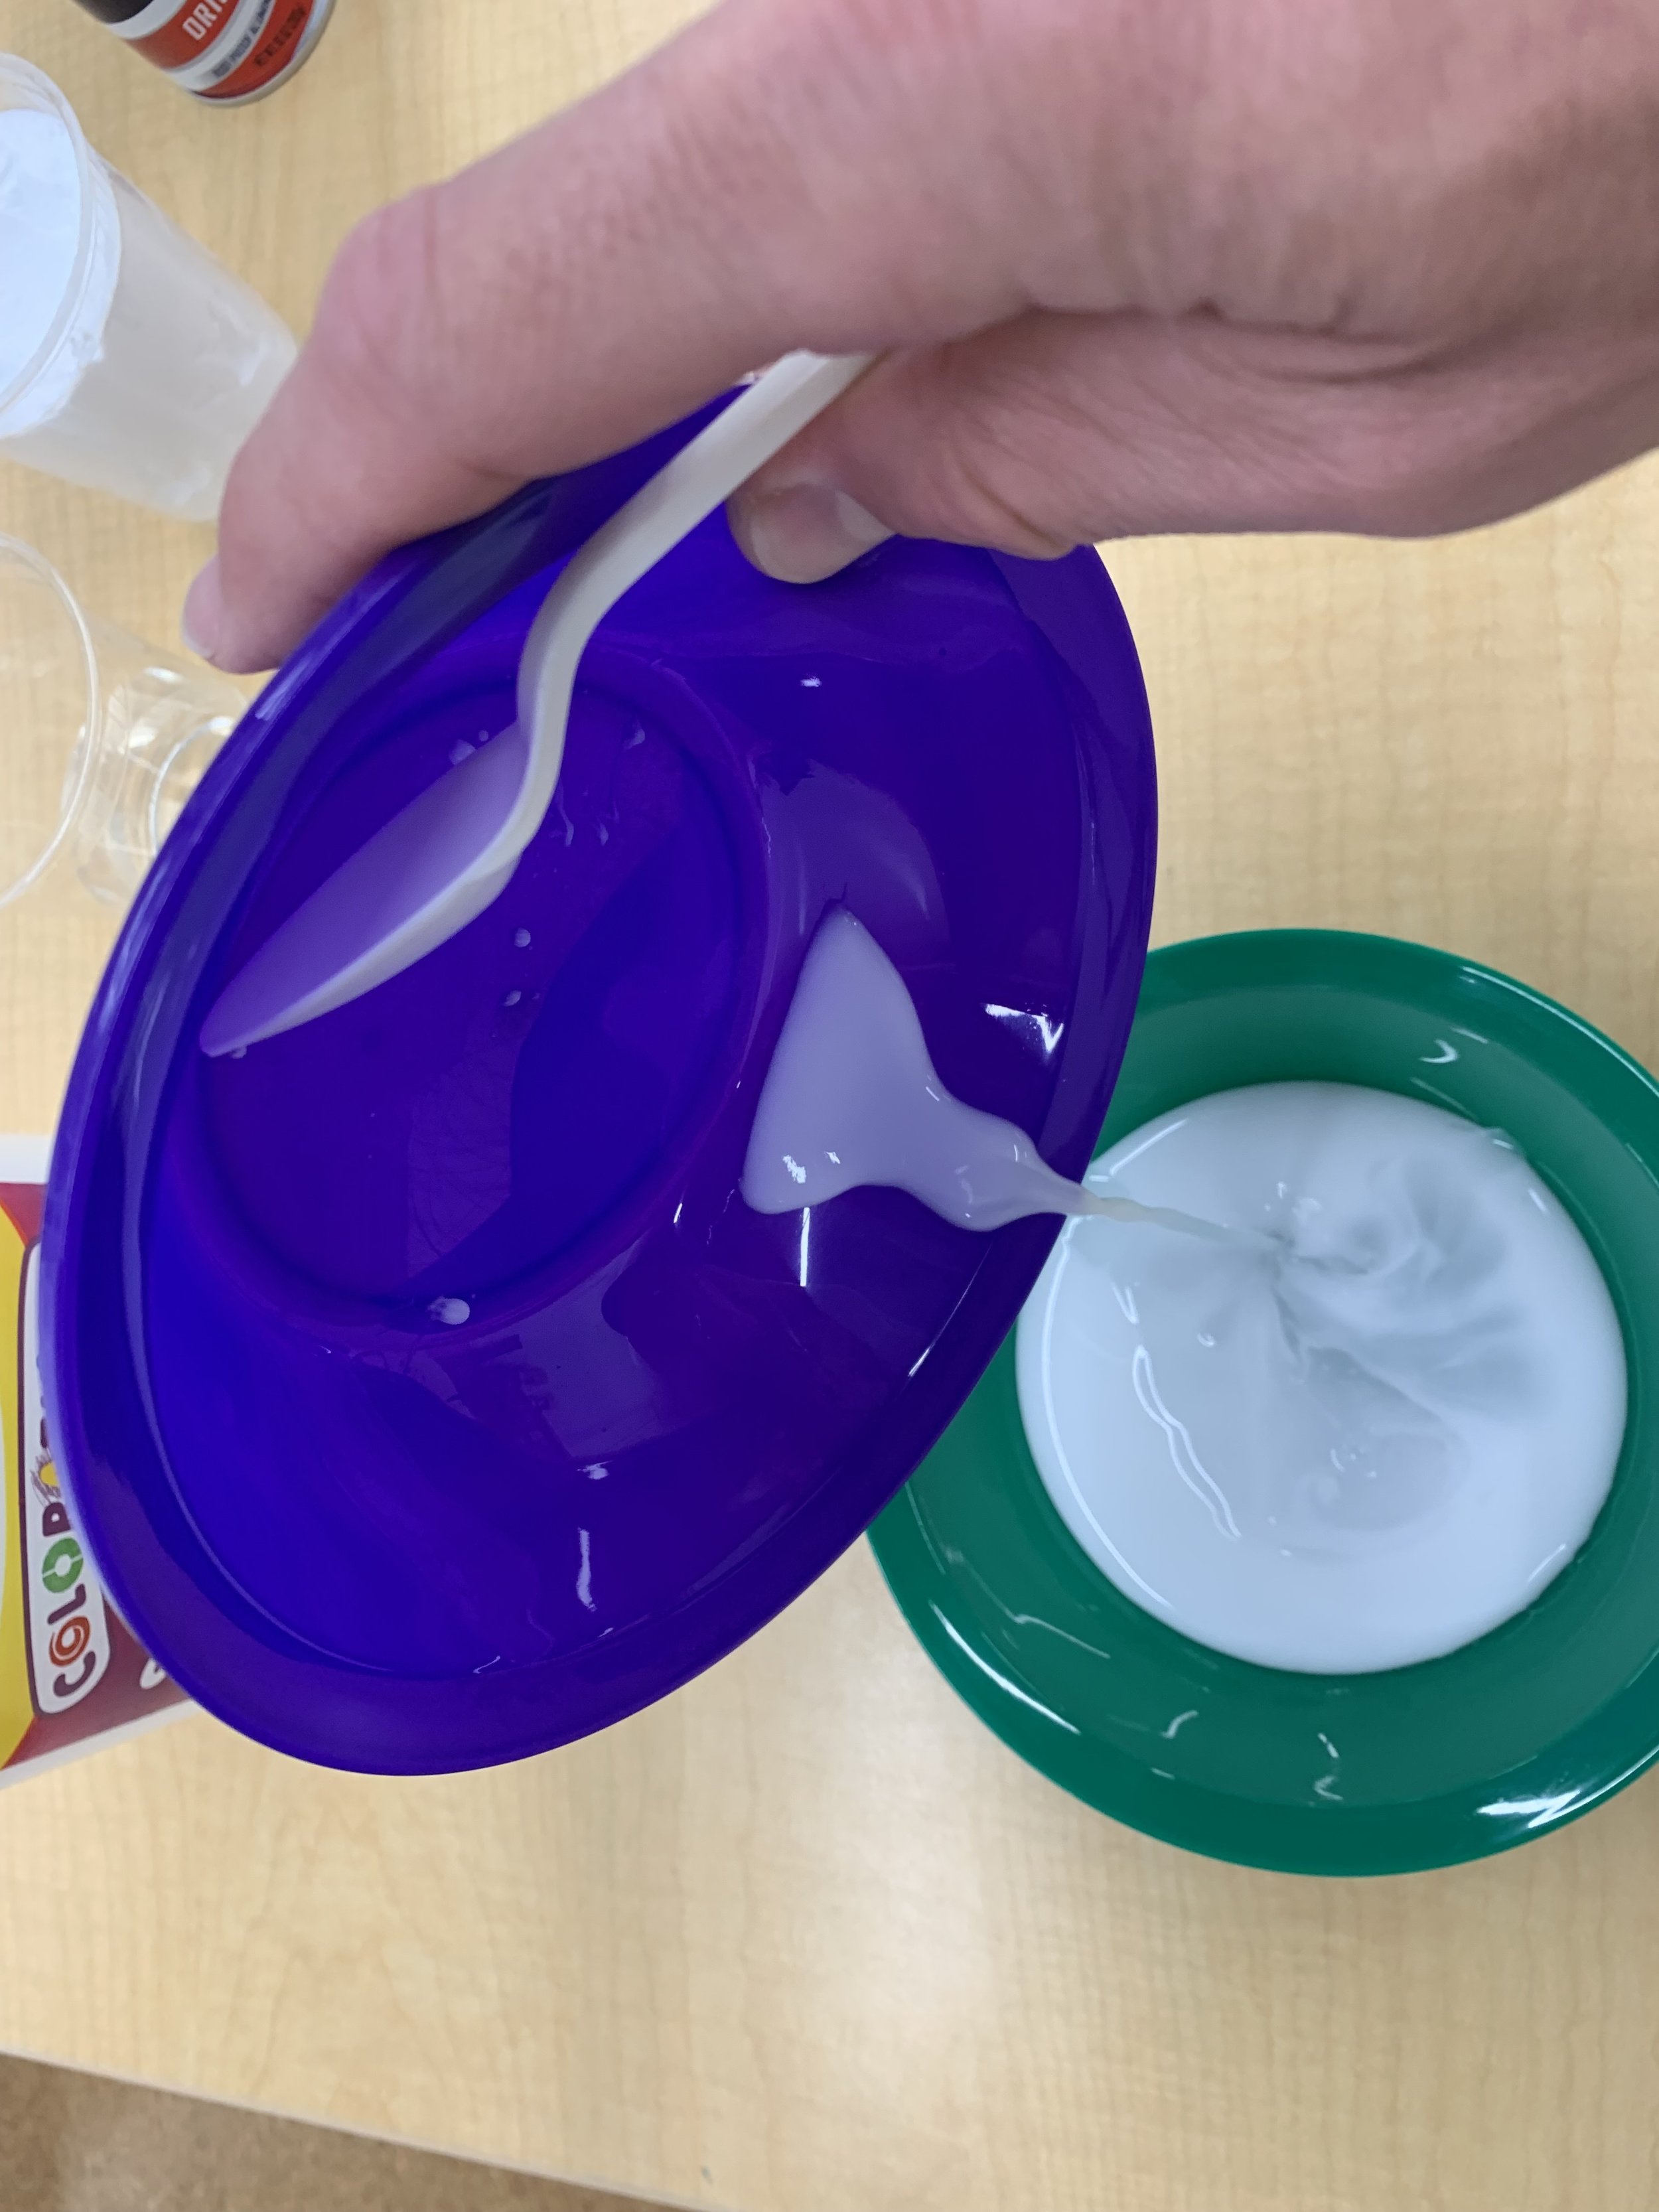  Add water and baking soda to the Glue 